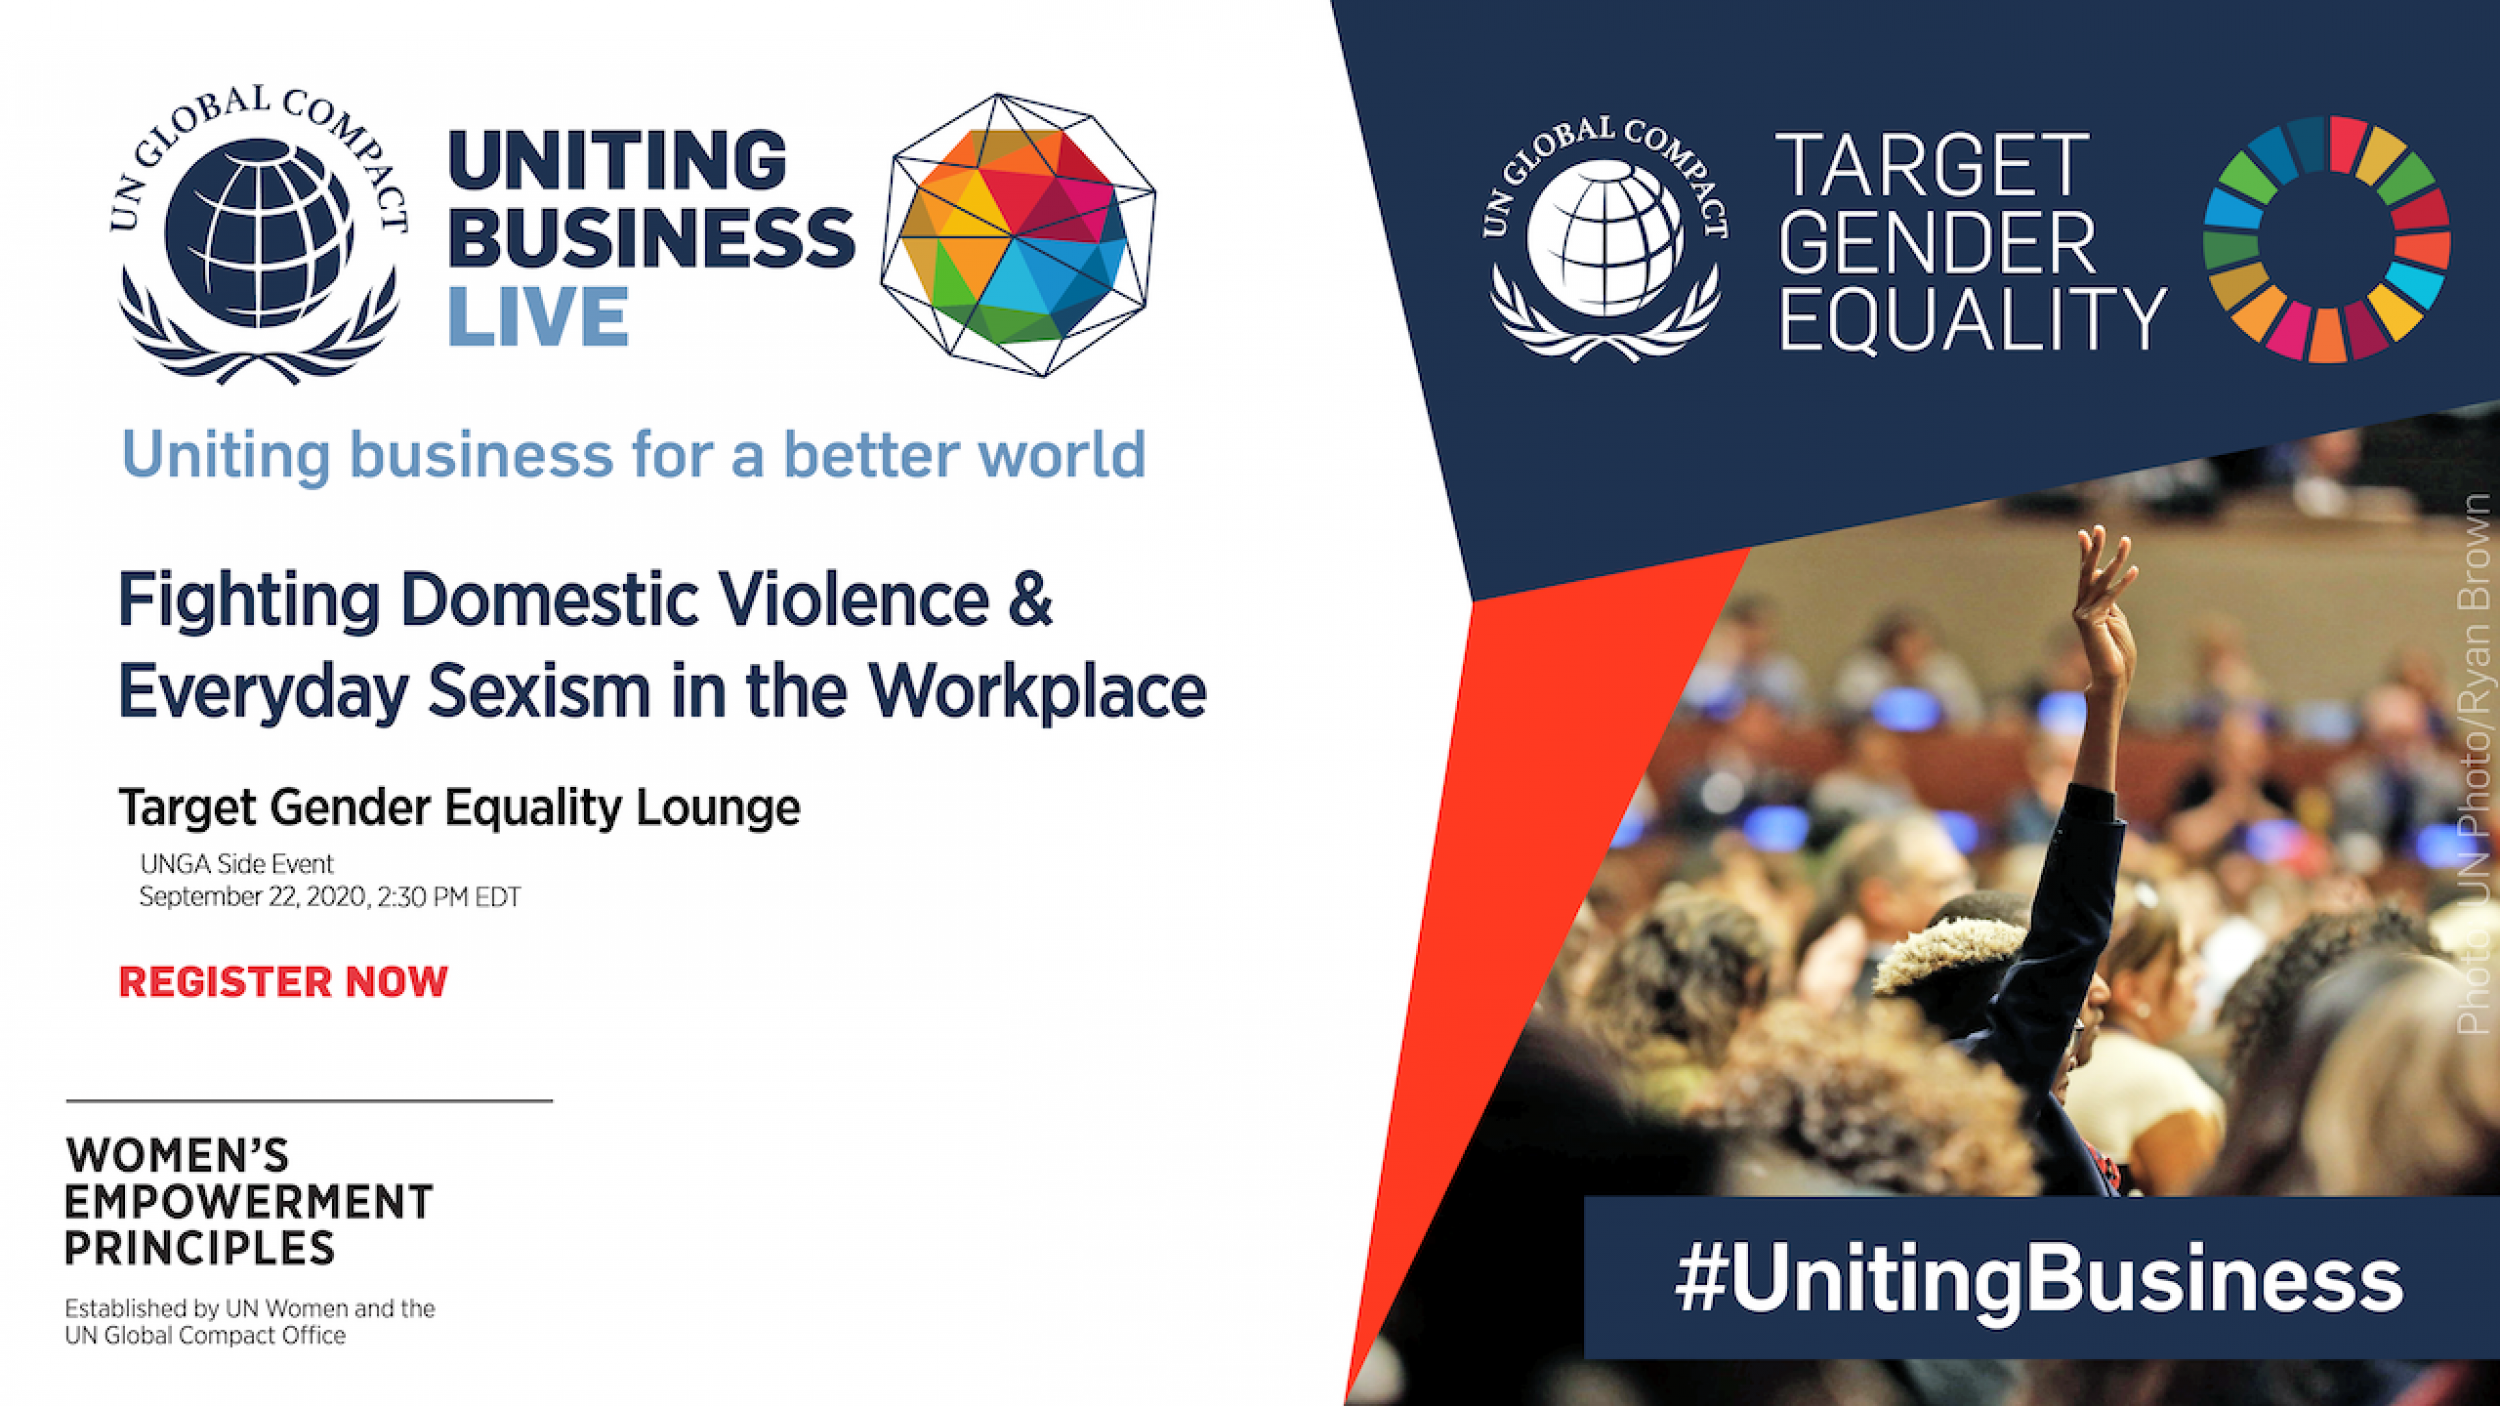 Uniting Business Live